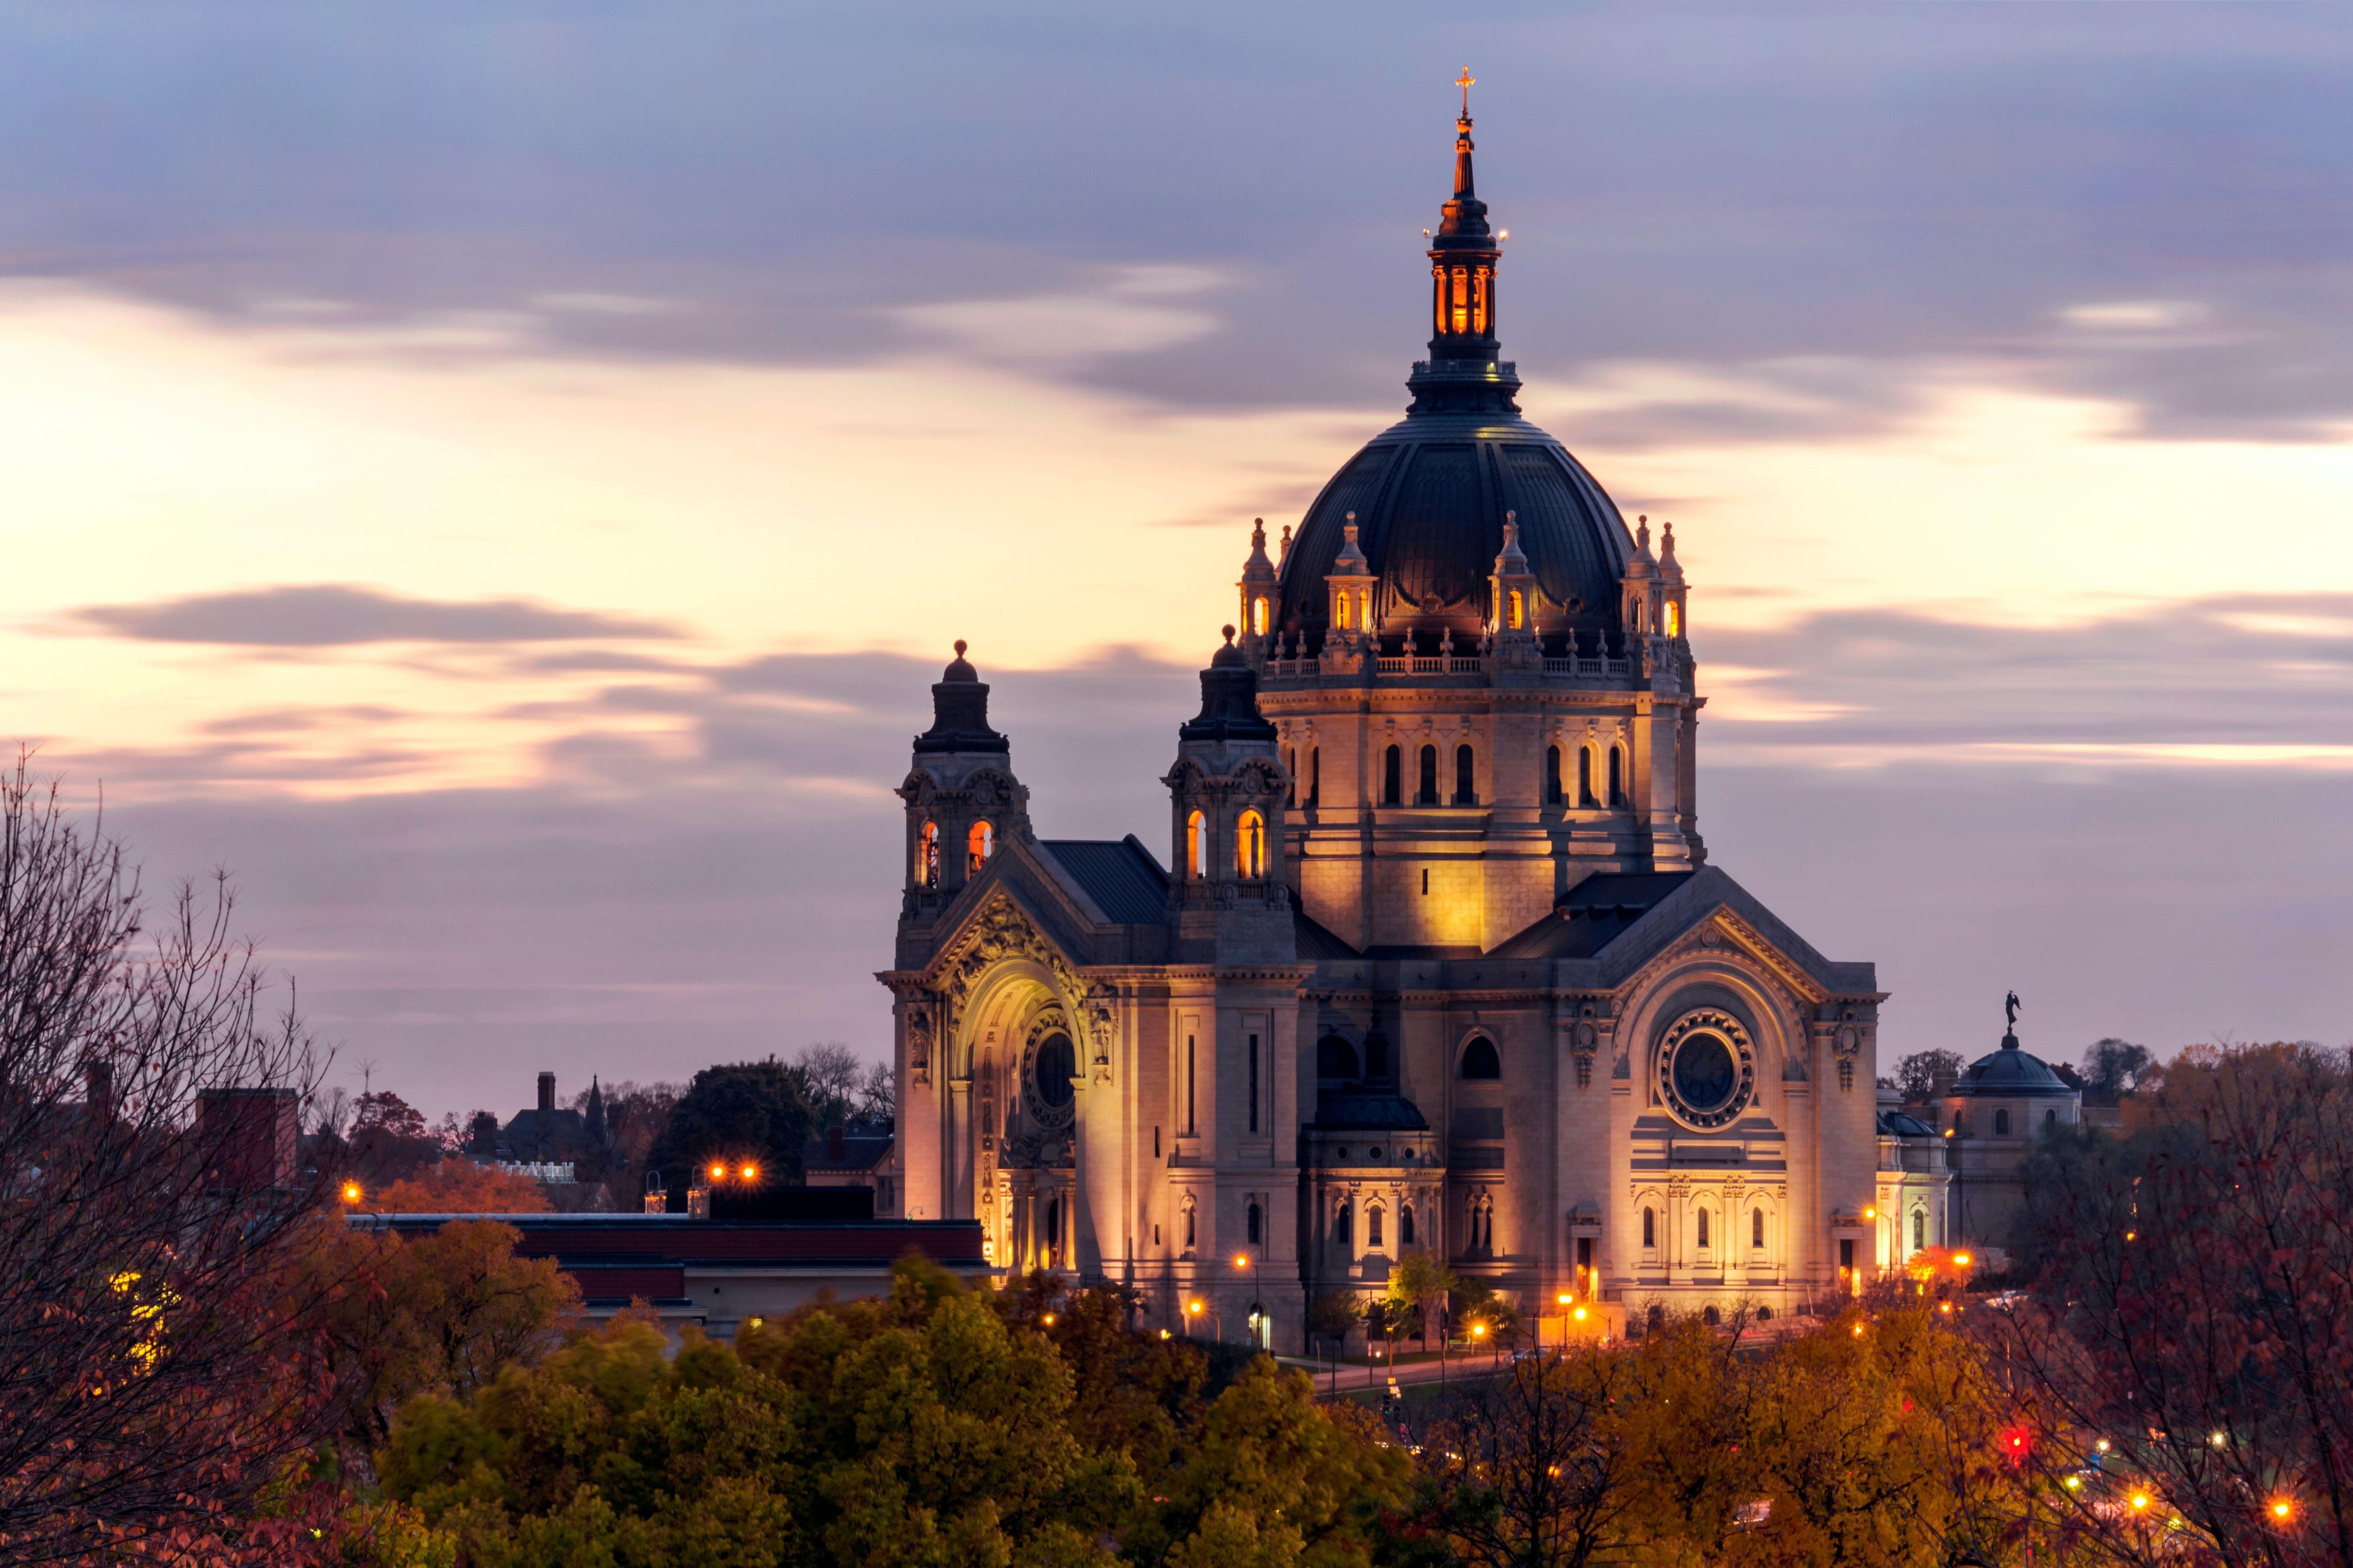 St. Paul Cathedral